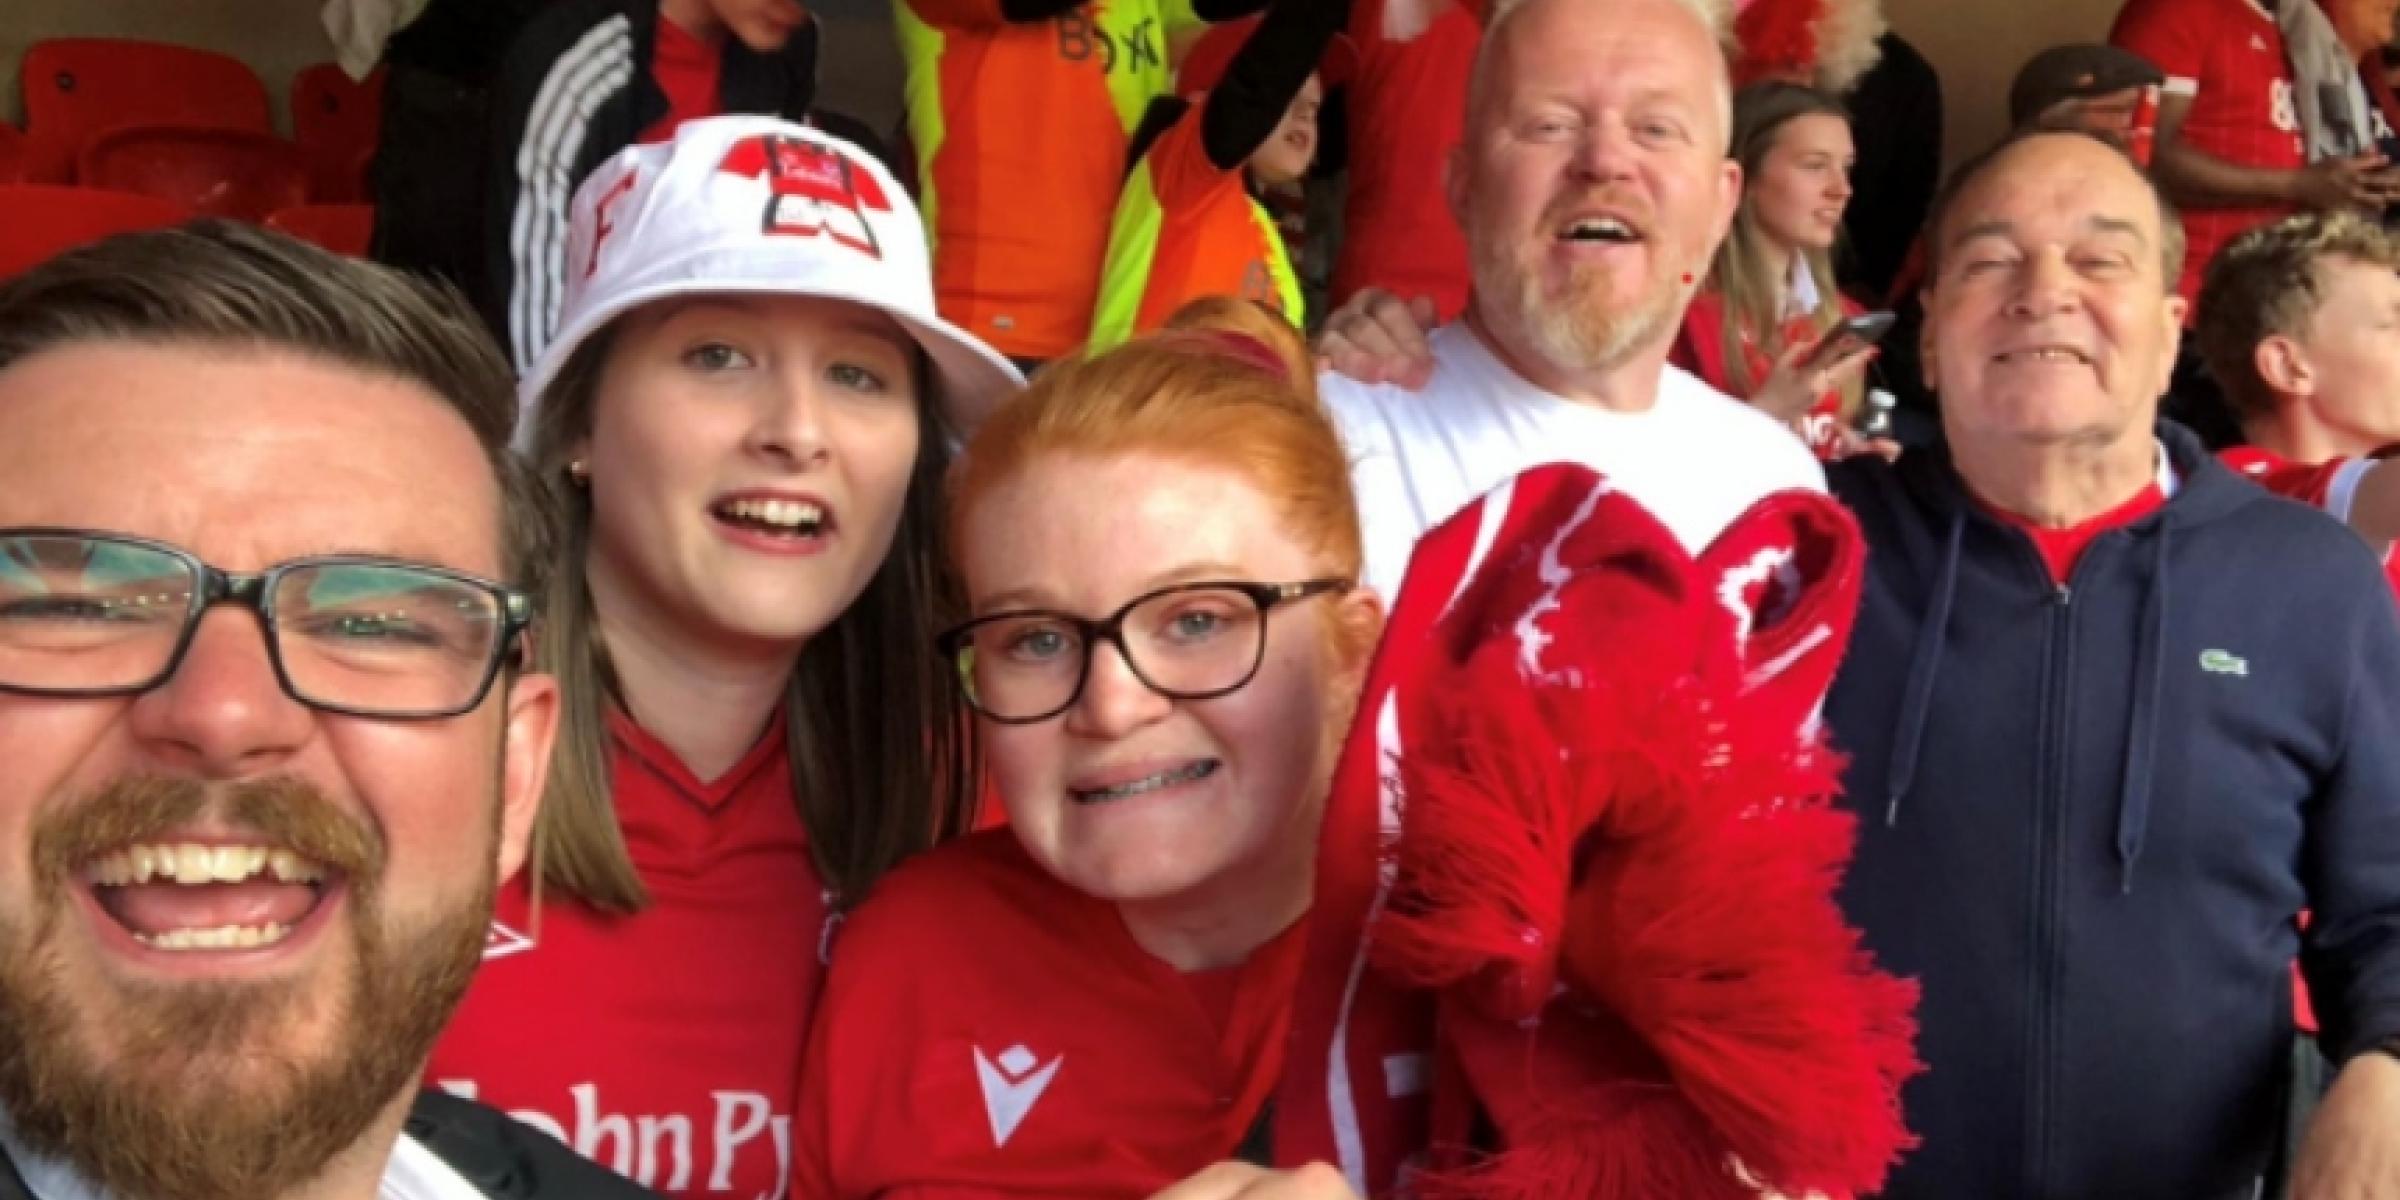 Paul and his family at Wembley wearing Nottingham Forrest kits